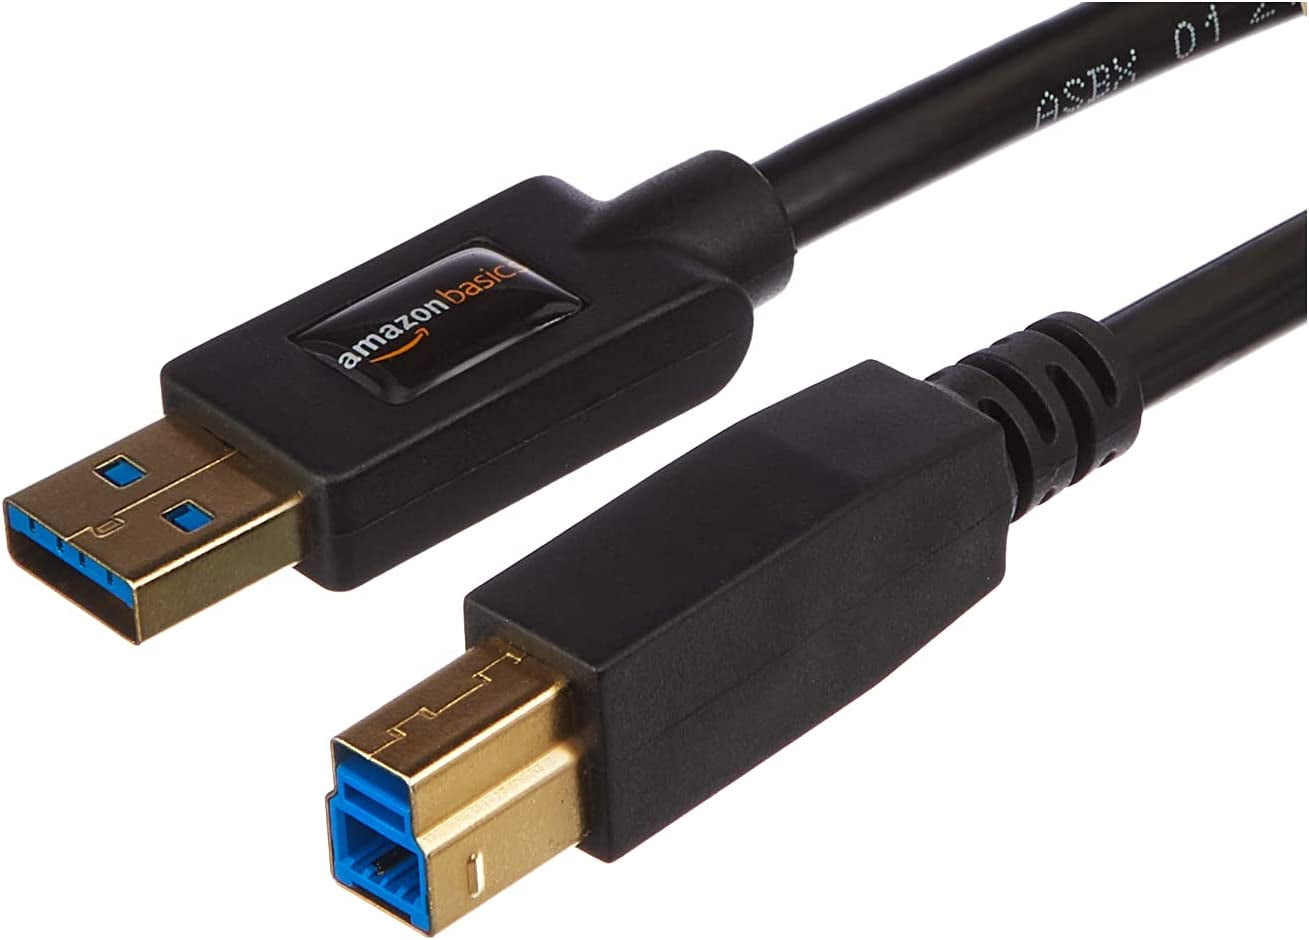 USB 3.0 Cable - to B-Male Adapter Cord Feet (1.8 Meters) - Walmart.com